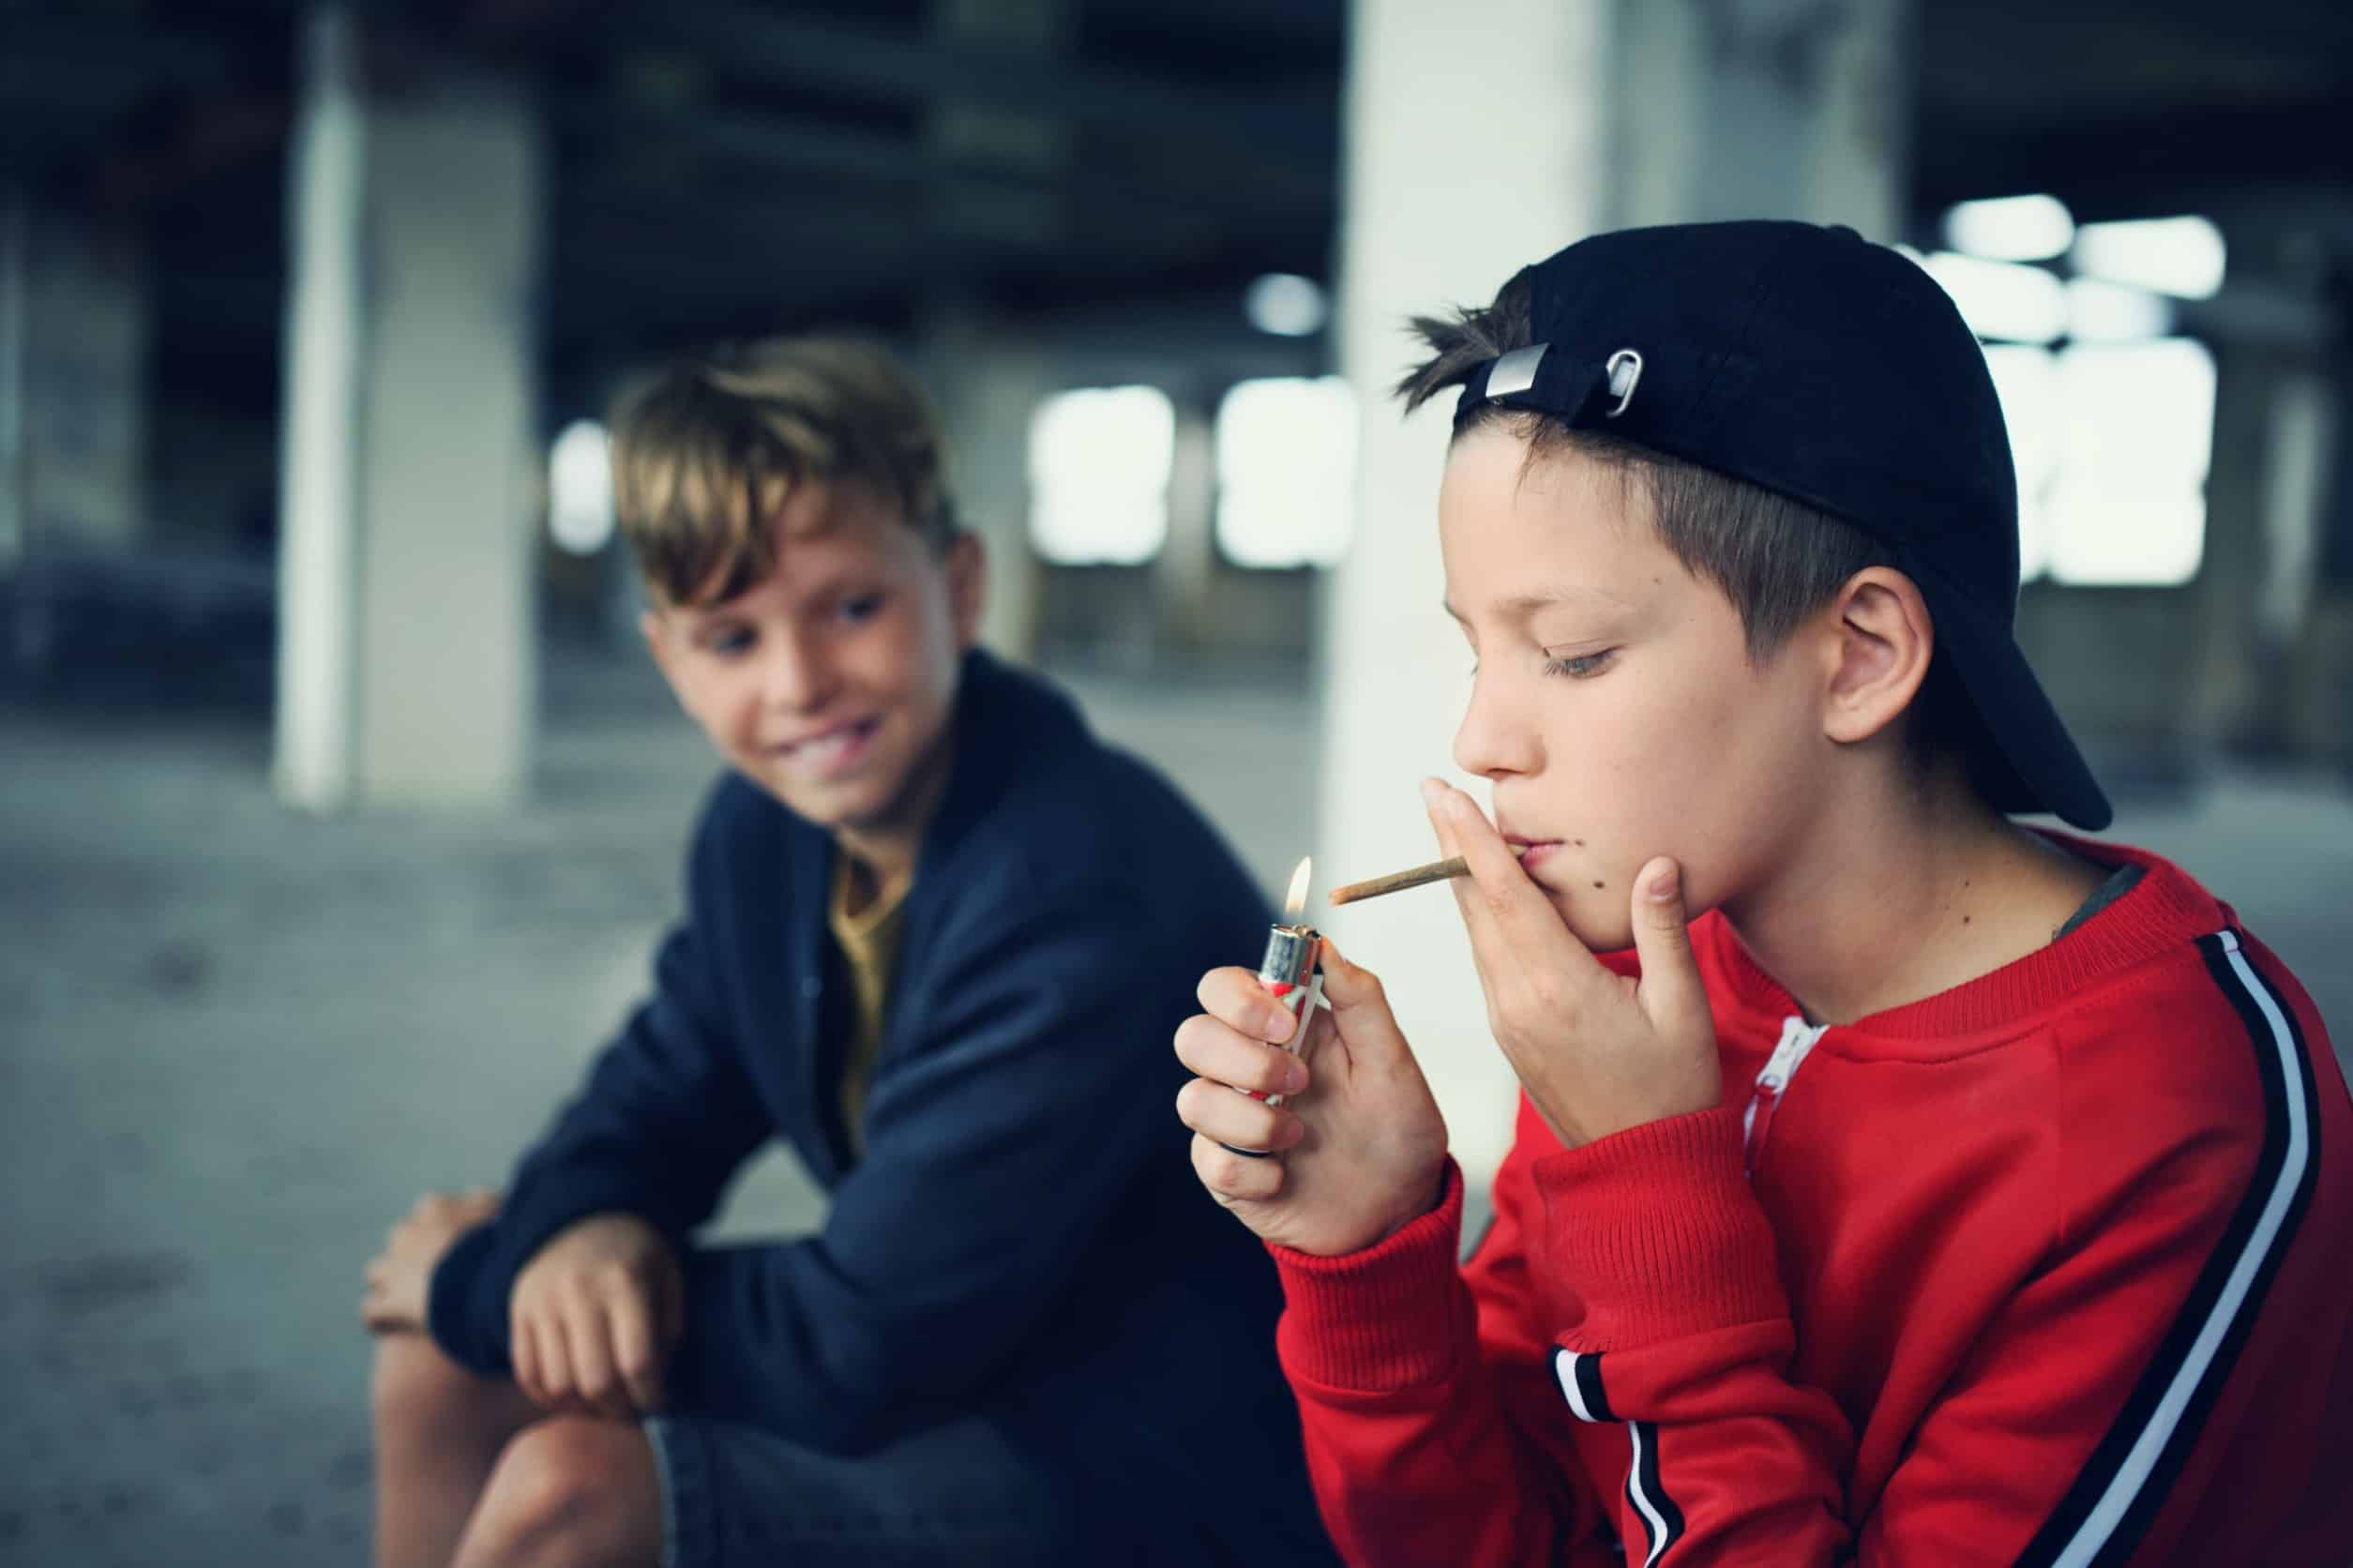 Two young adolescent boys smoking marijuana in a parking garage